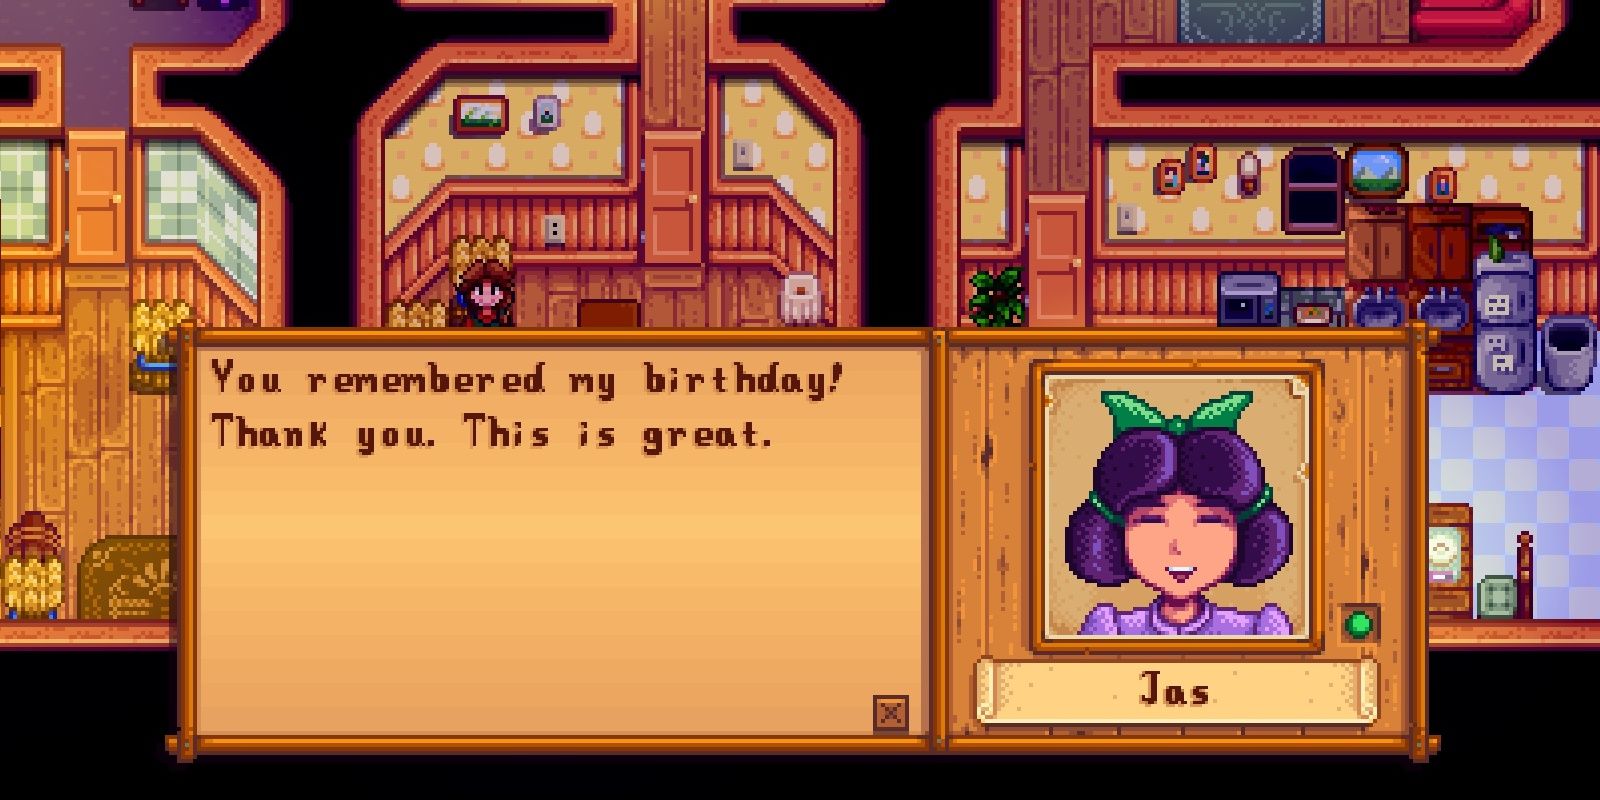 Jas recieves a Liked birthday gift in her home